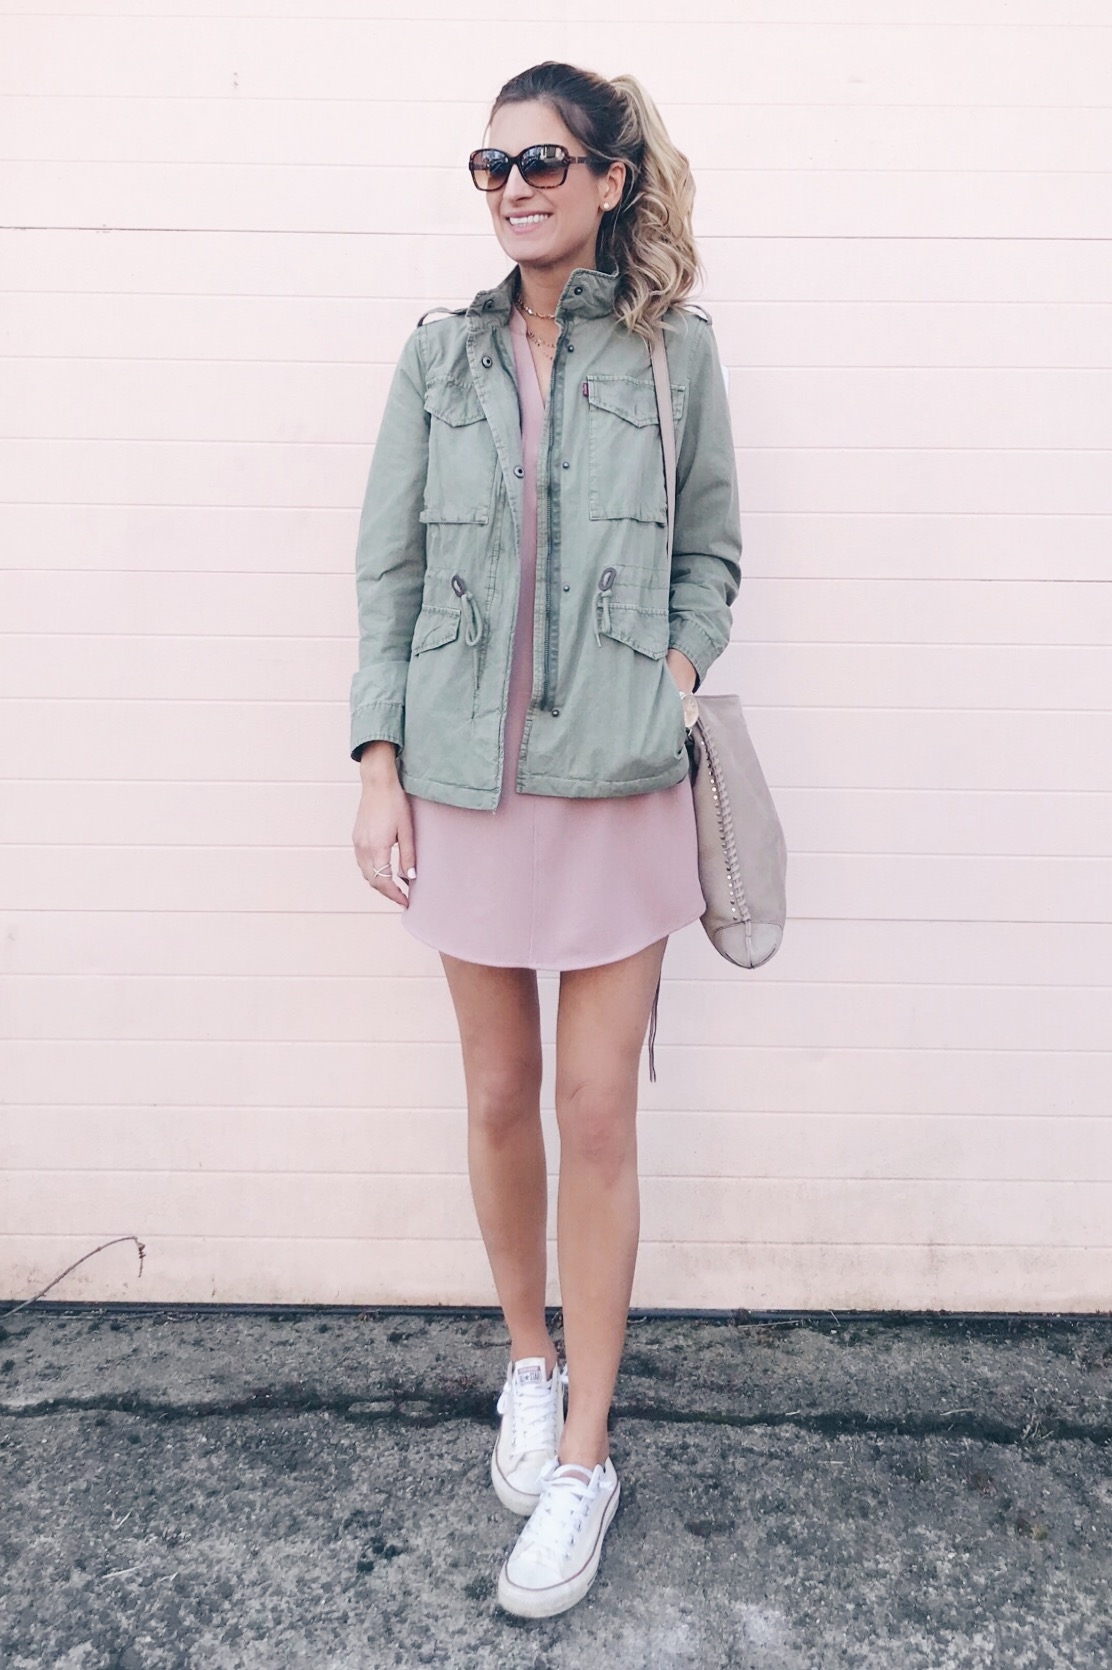 spring capsule wardrobe 2018 - shift dress with sneakers and utility jacket on pinteresting plans blog